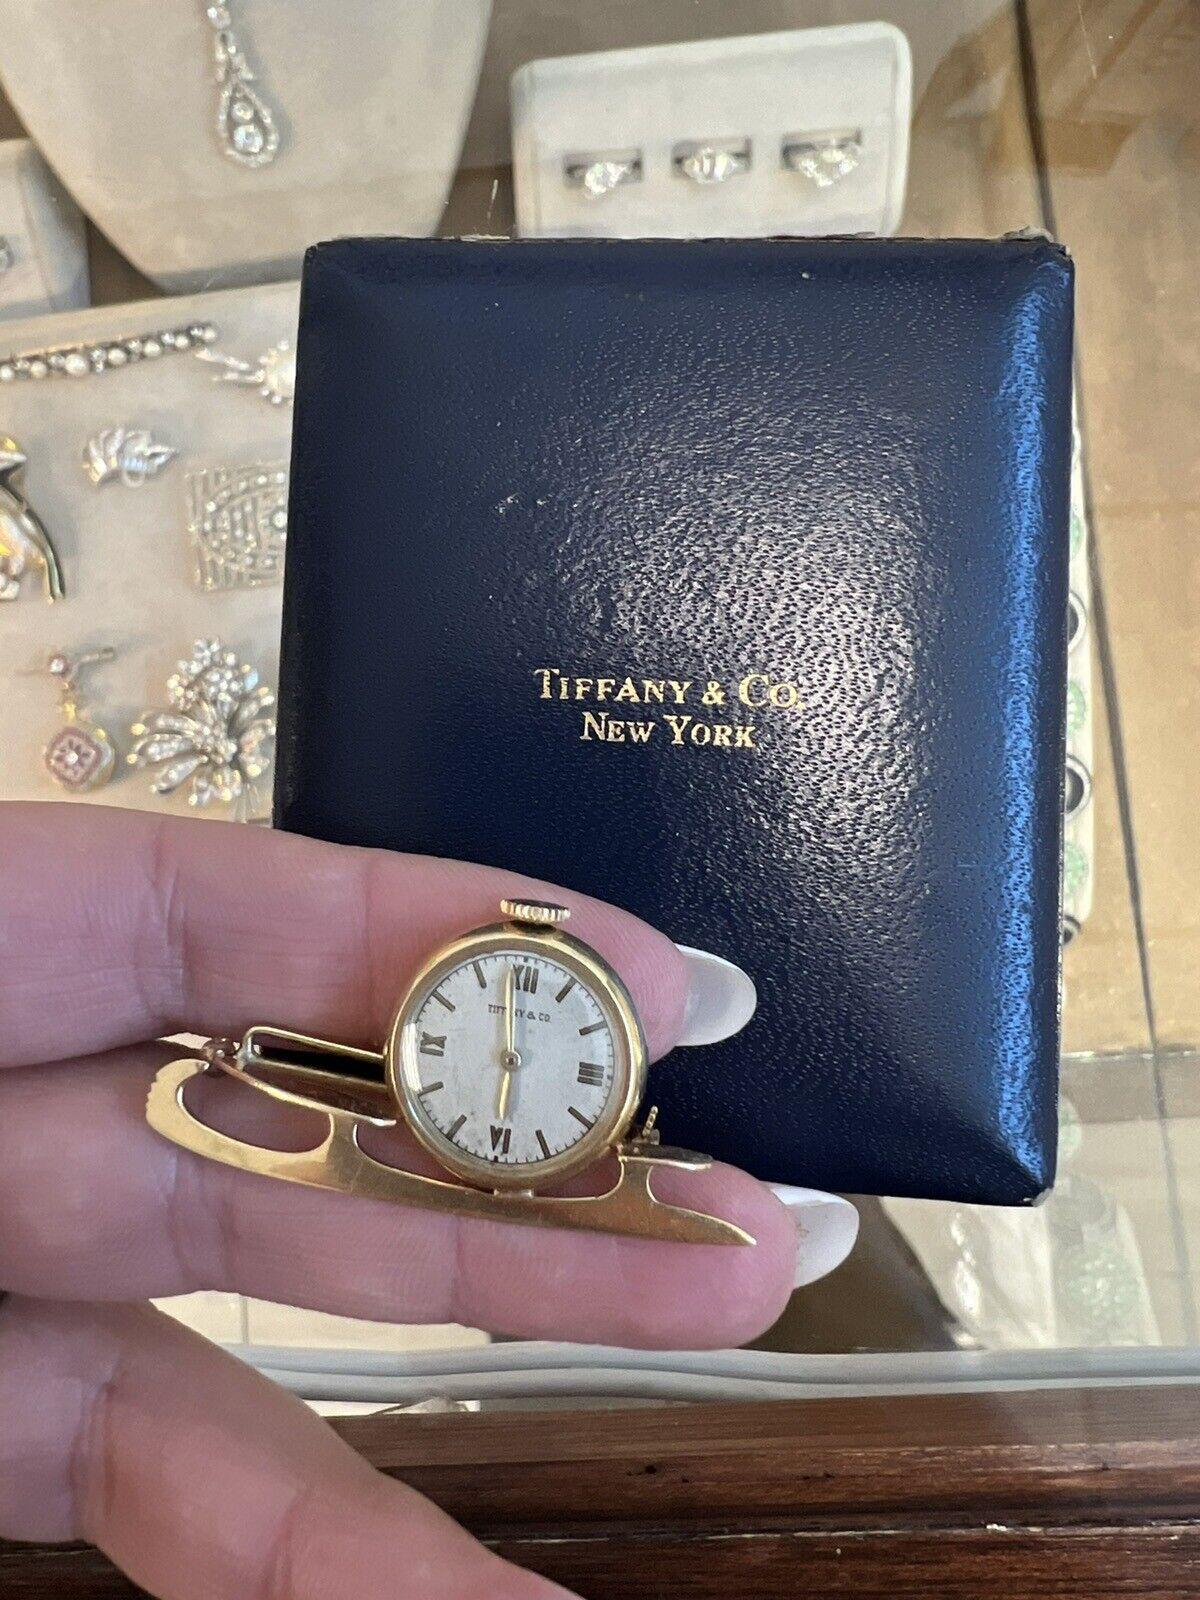 TIFFANY & CO. Retro 14k Yellow Gold Ice Skating Pin / Watch w/Box Retro 1950s In Excellent Condition For Sale In Beverly Hills, CA